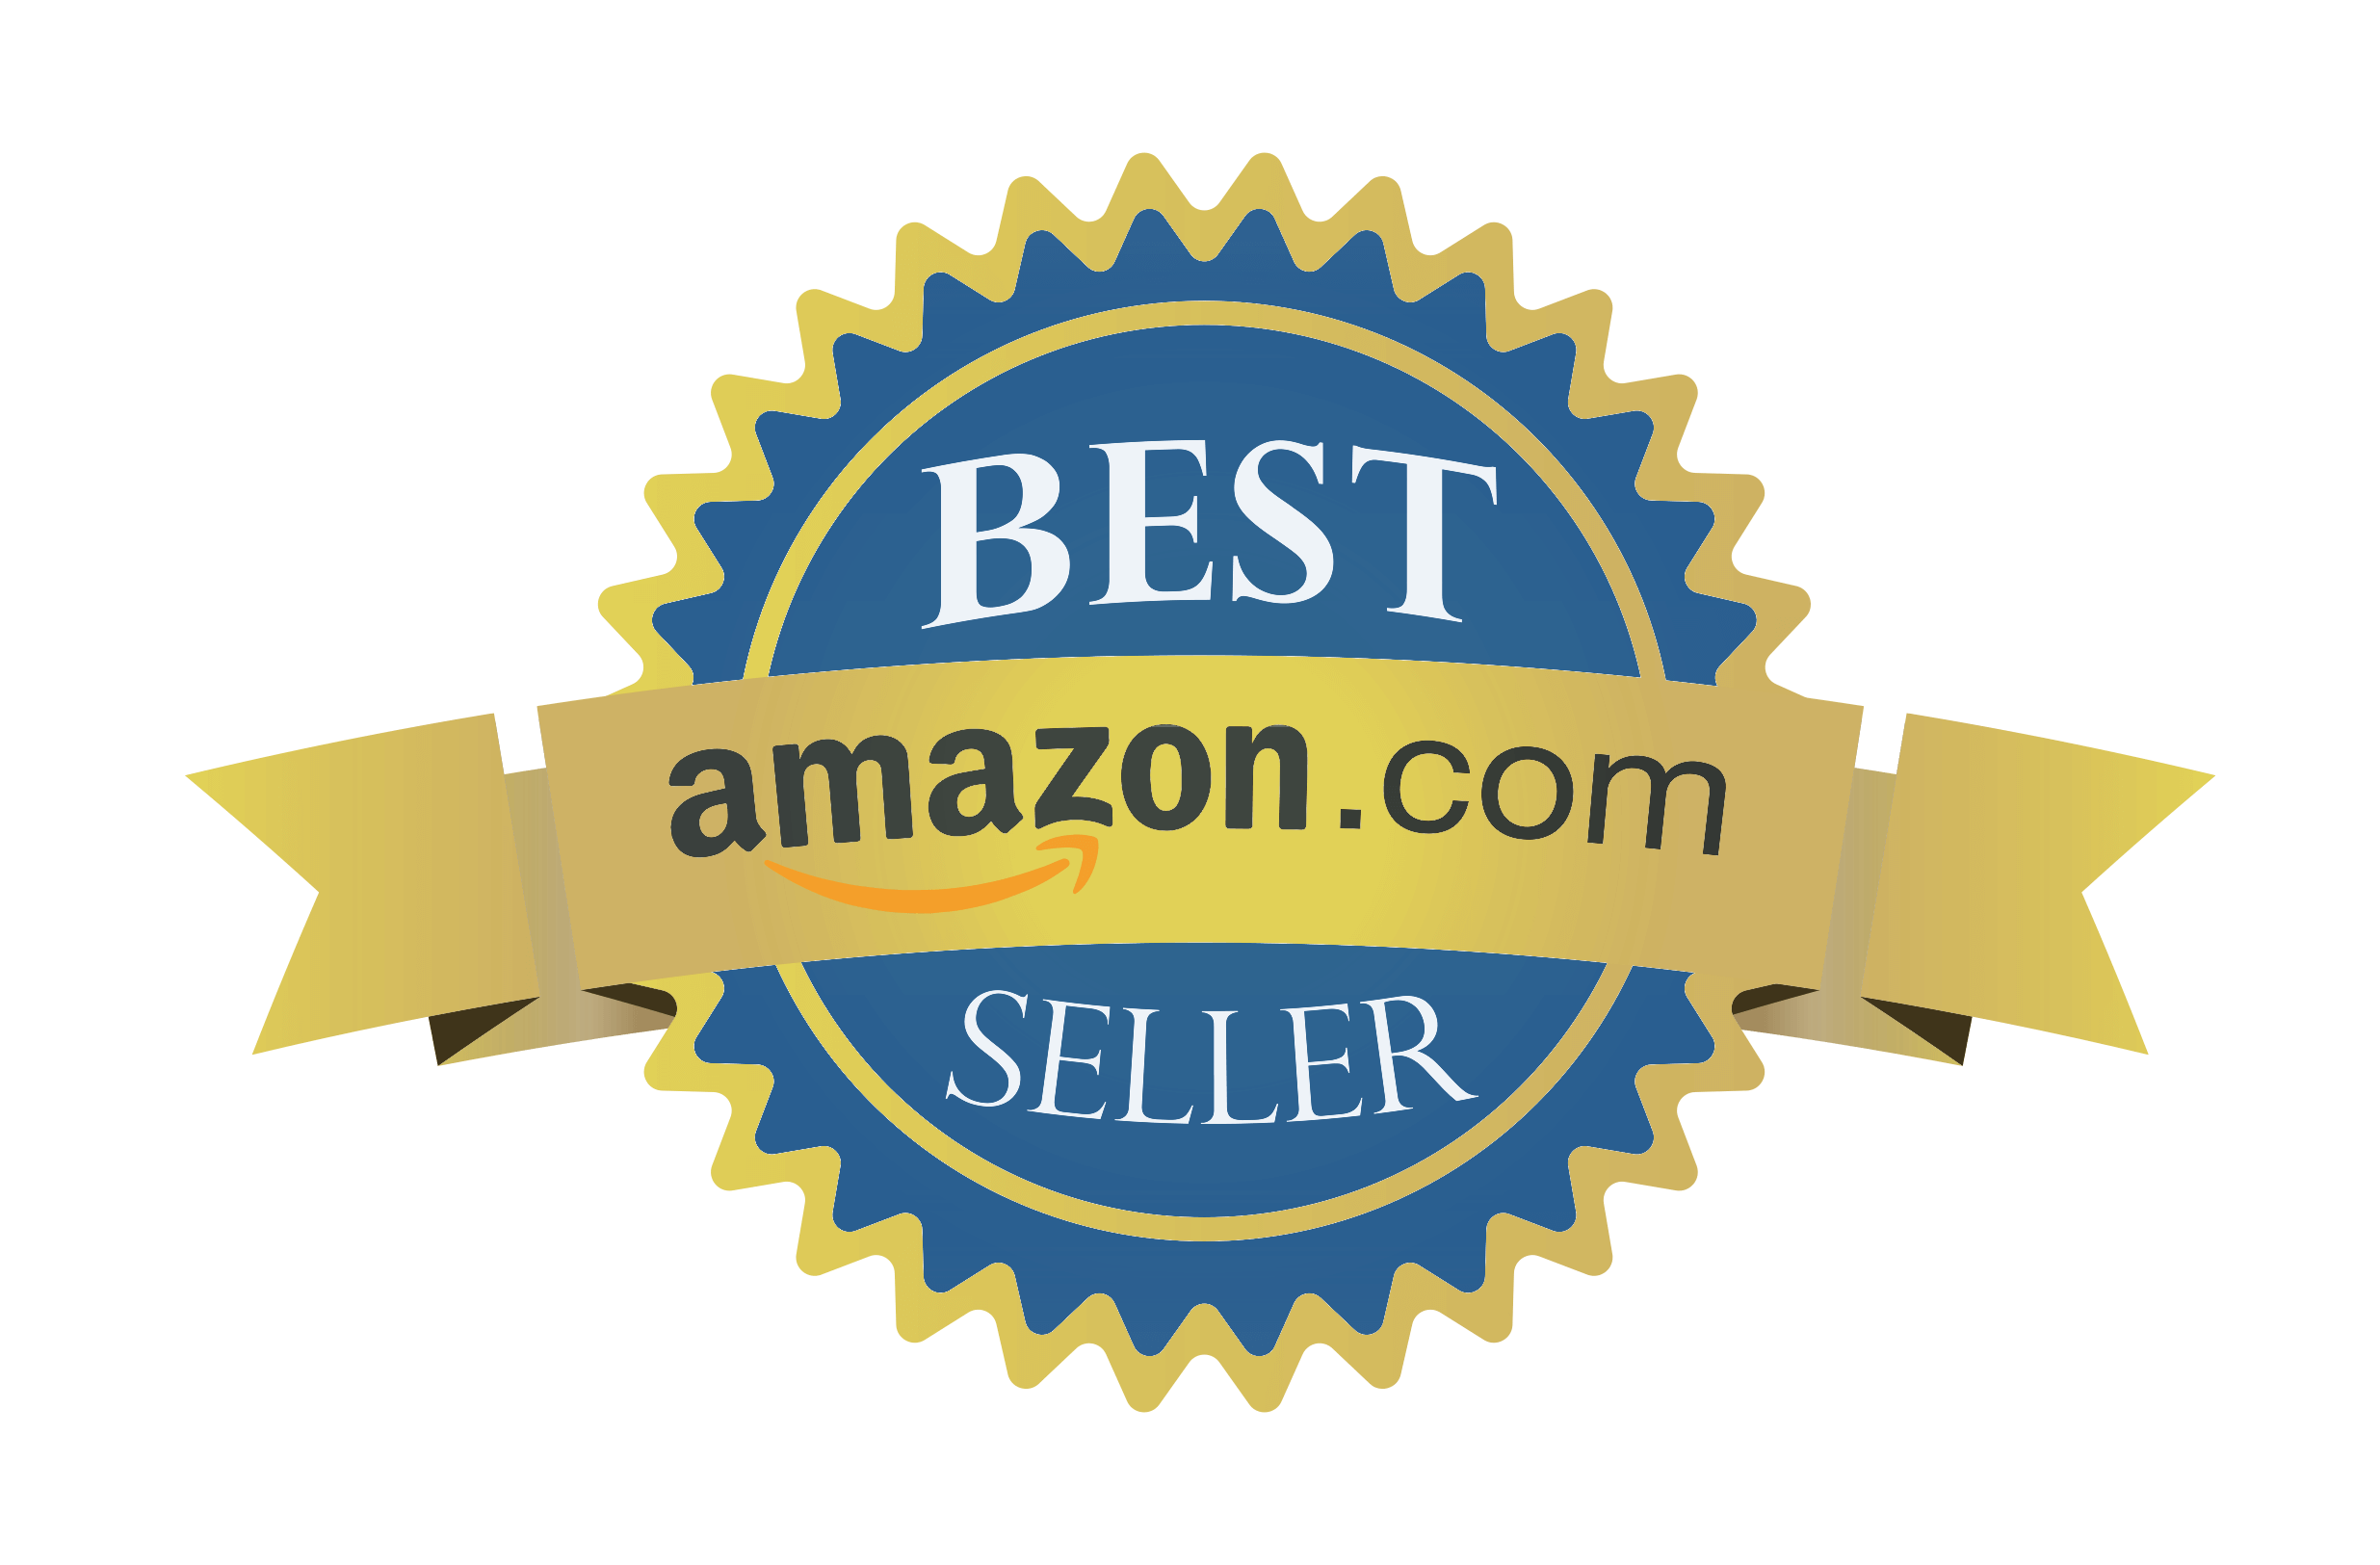 Discover the Amazon top sellers June 2018 : Ultimate buyer's guide